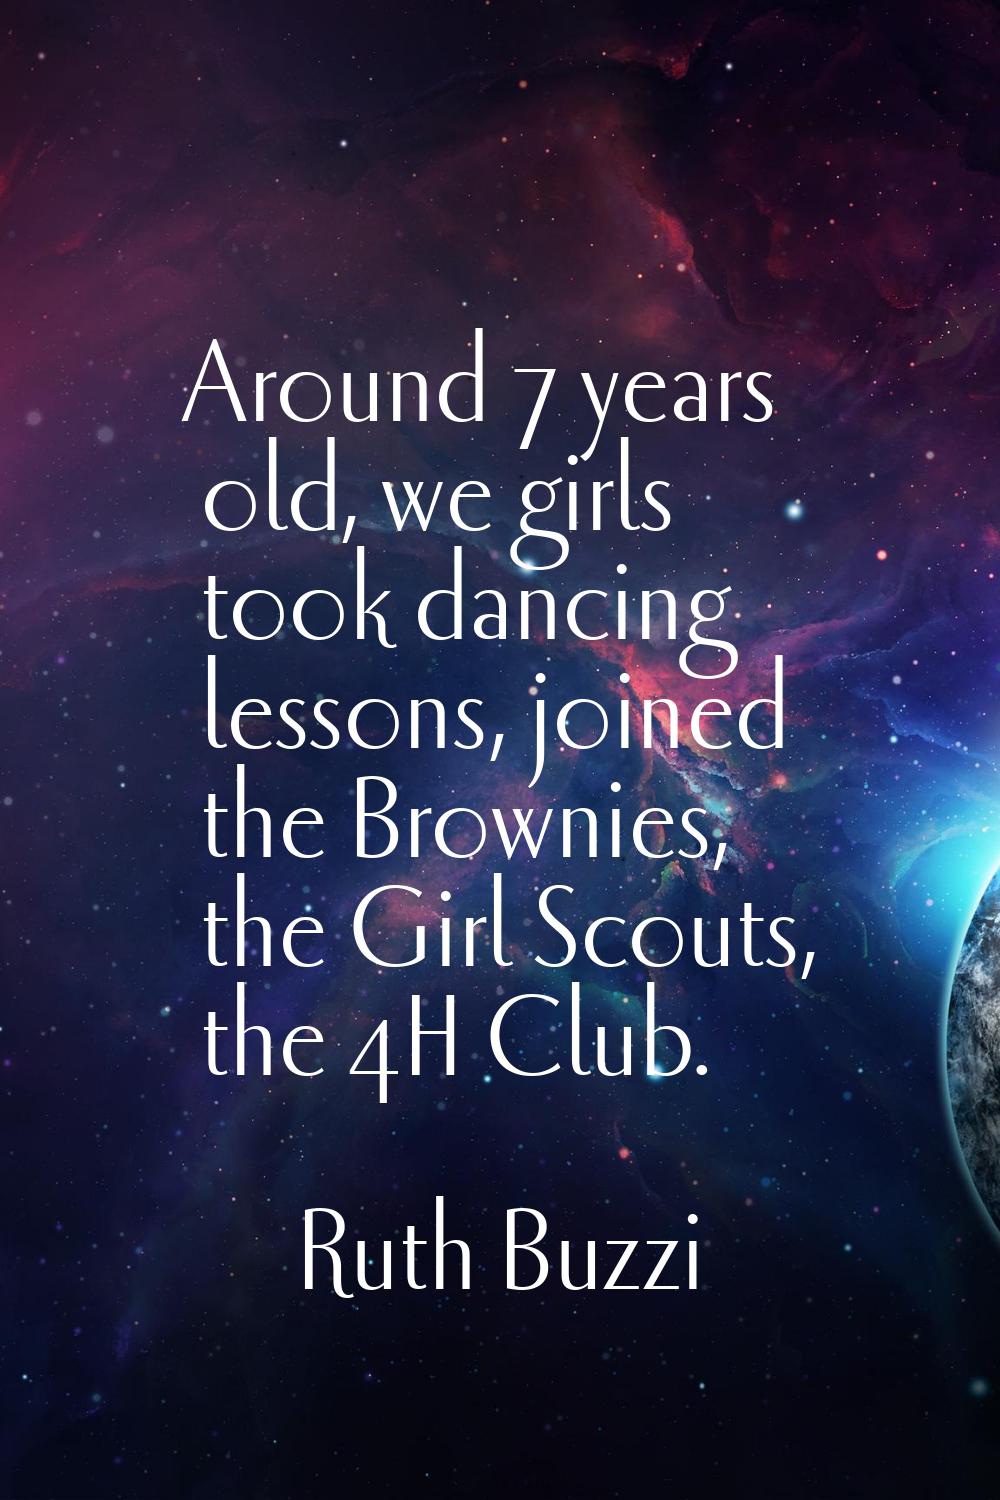 Around 7 years old, we girls took dancing lessons, joined the Brownies, the Girl Scouts, the 4H Clu